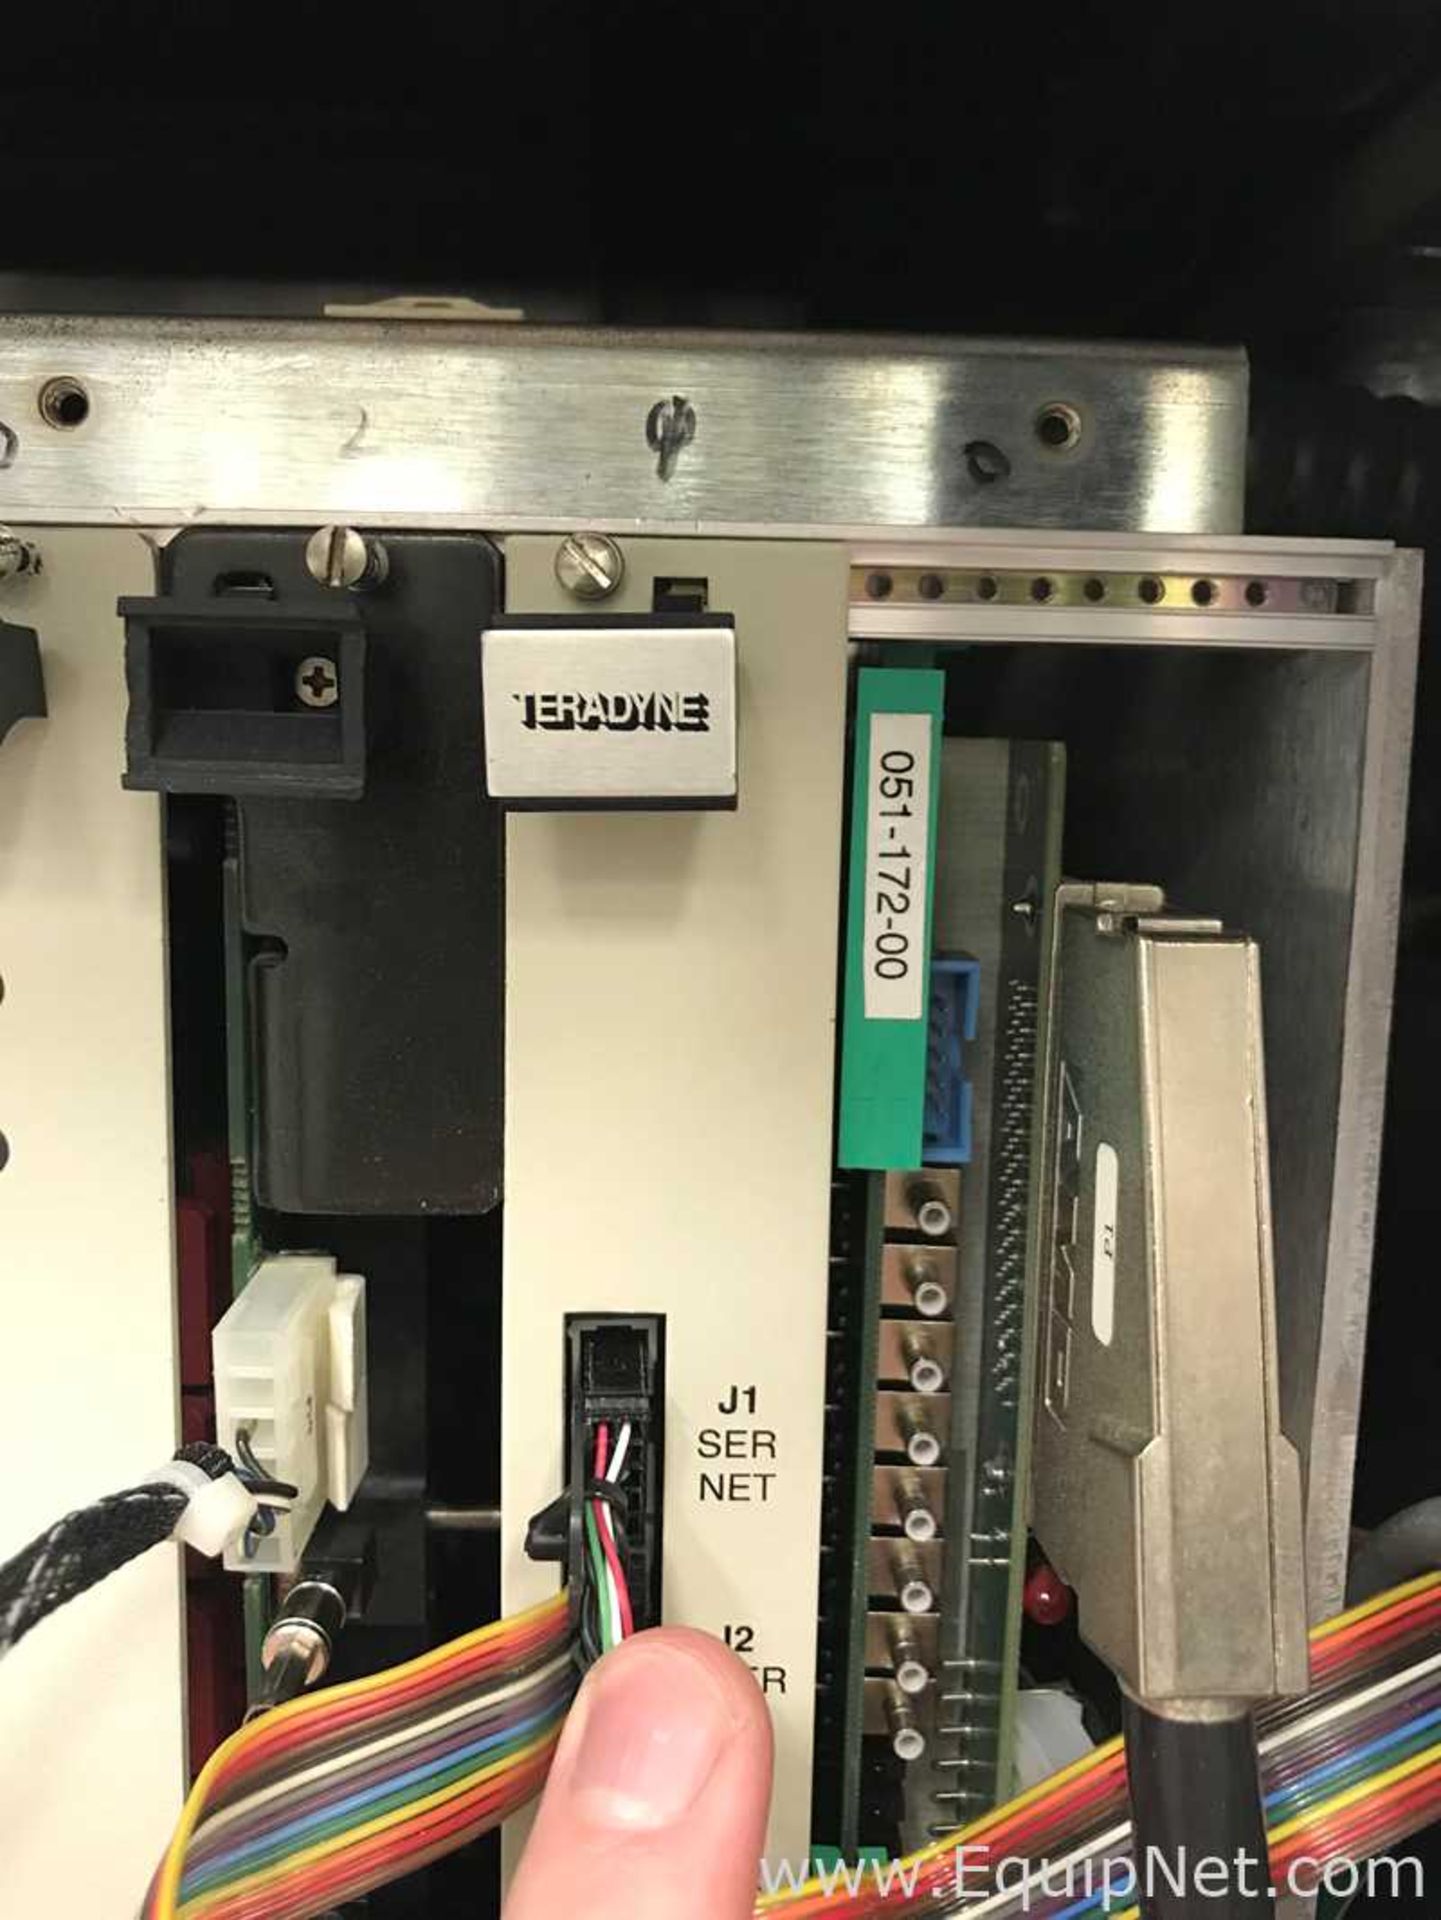 Teradyne SC-108-19 Production Board Test Equipment - Image 8 of 12